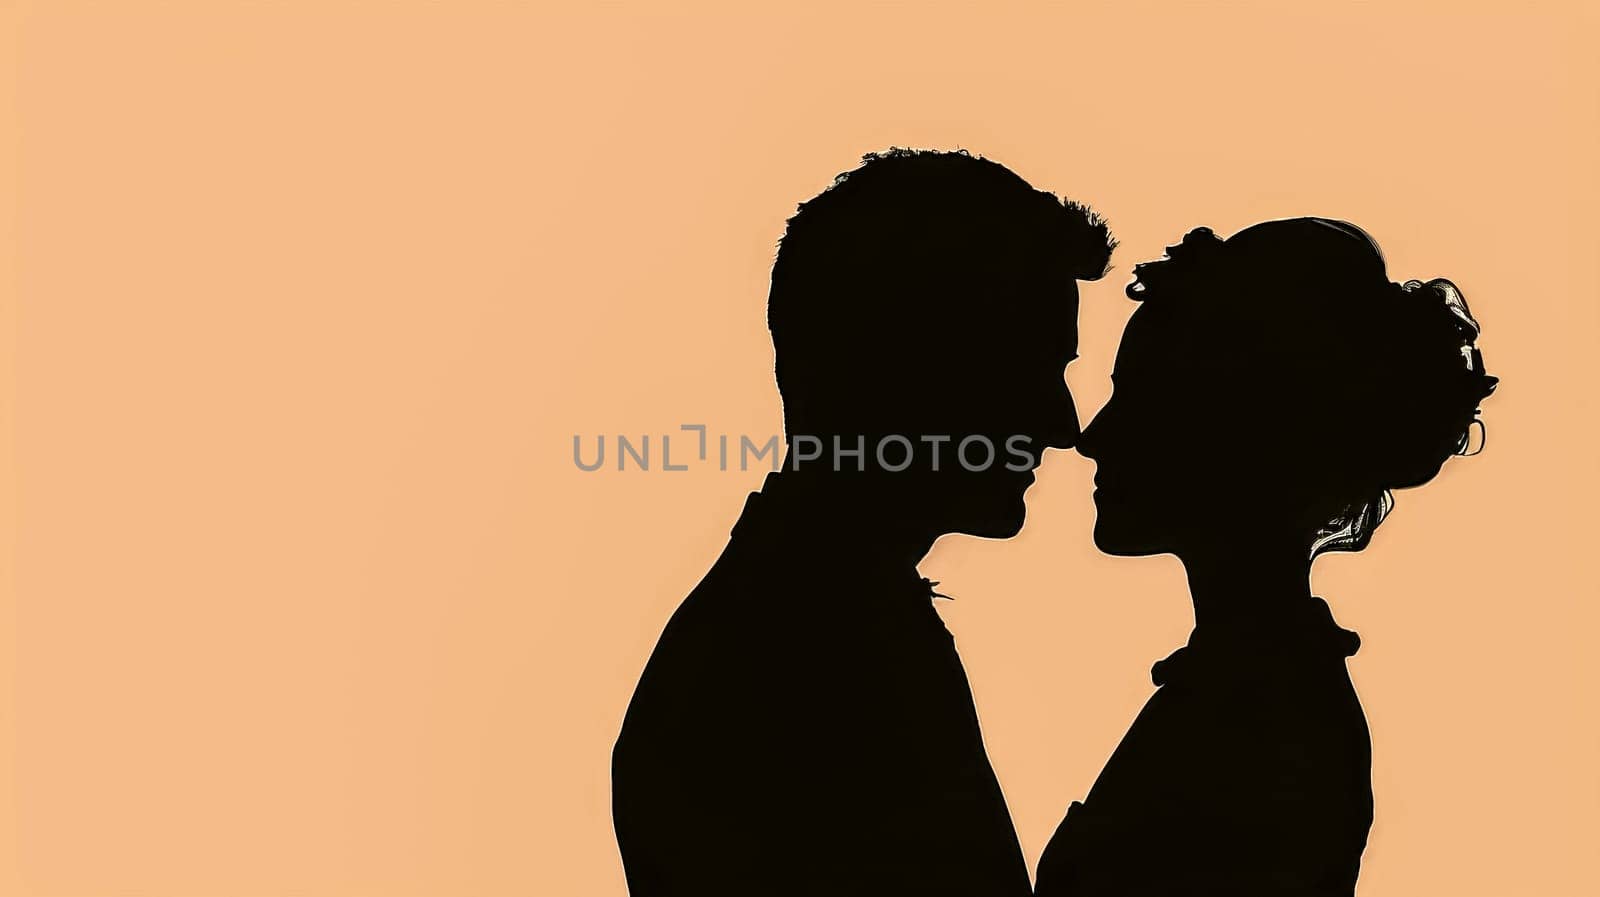 Striking silhouette of a man and woman about to kiss against a warm background